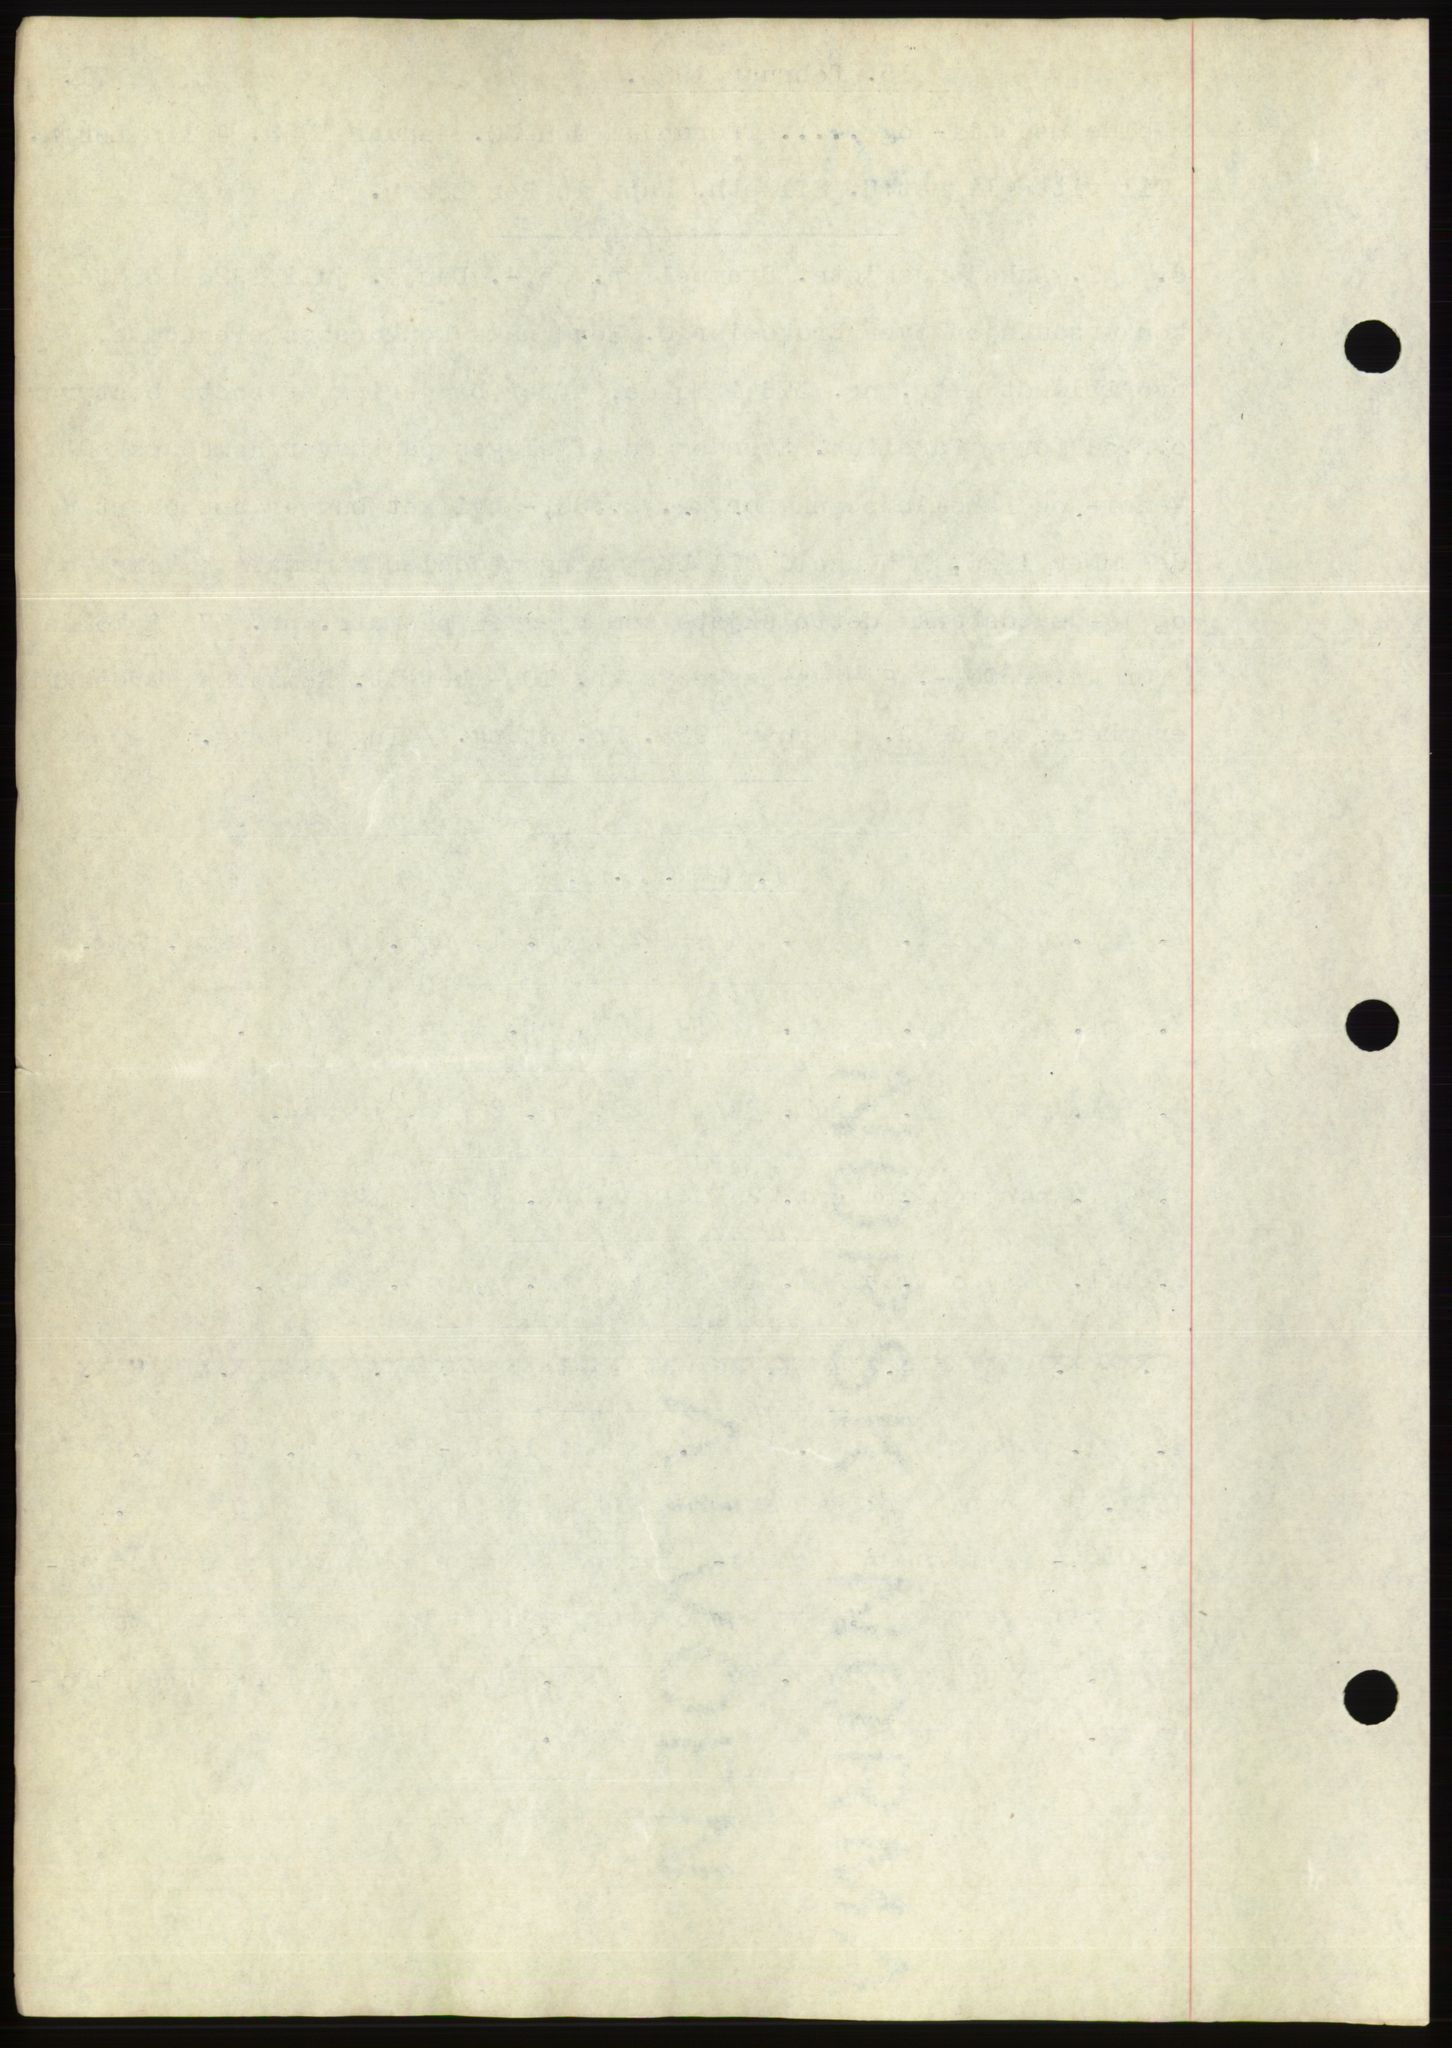 Molde byfogd, SAT/A-0025/2/2C/L0012: Mortgage book no. 12, 1932-1935, Deed date: 15.02.1933